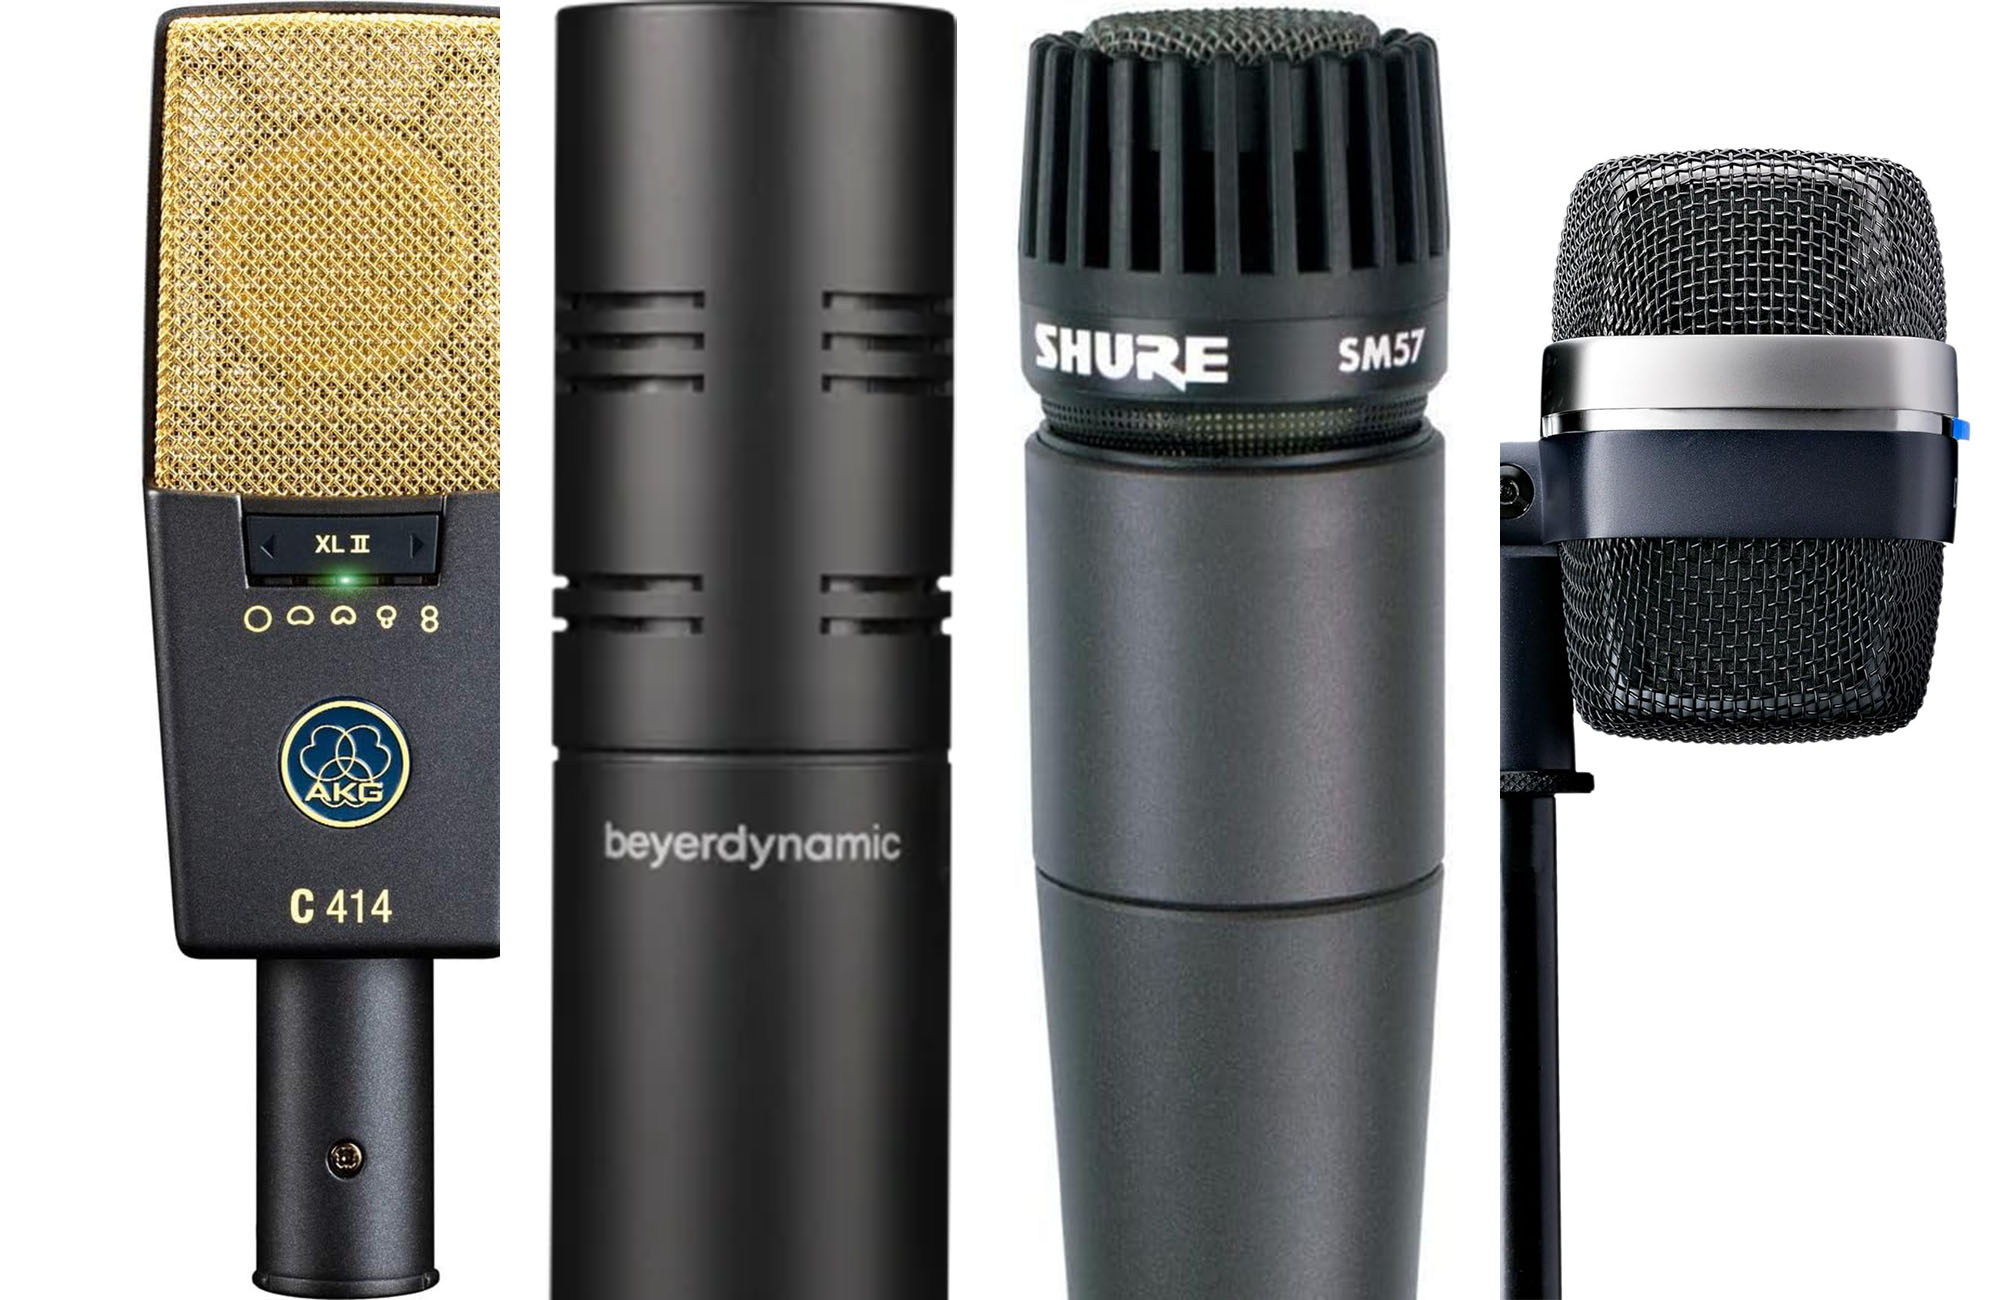 Four of the best drum mics shown side-by-side on a white background